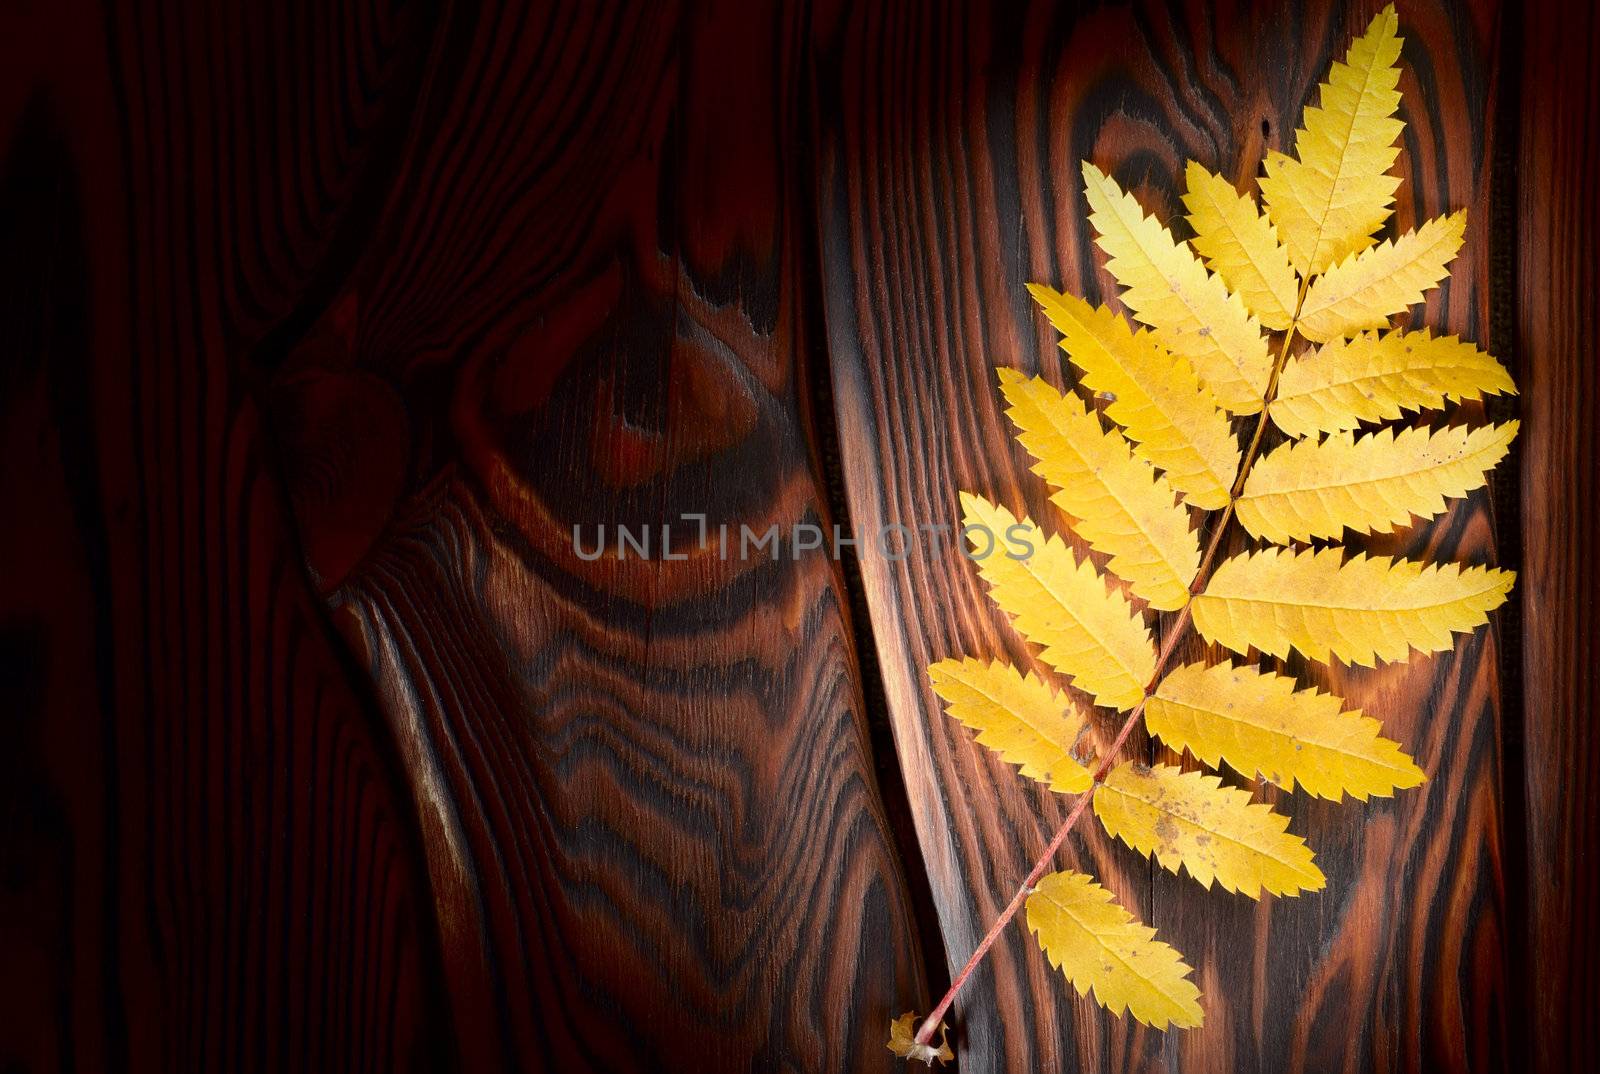 Autumn decoration on an old wooden surface